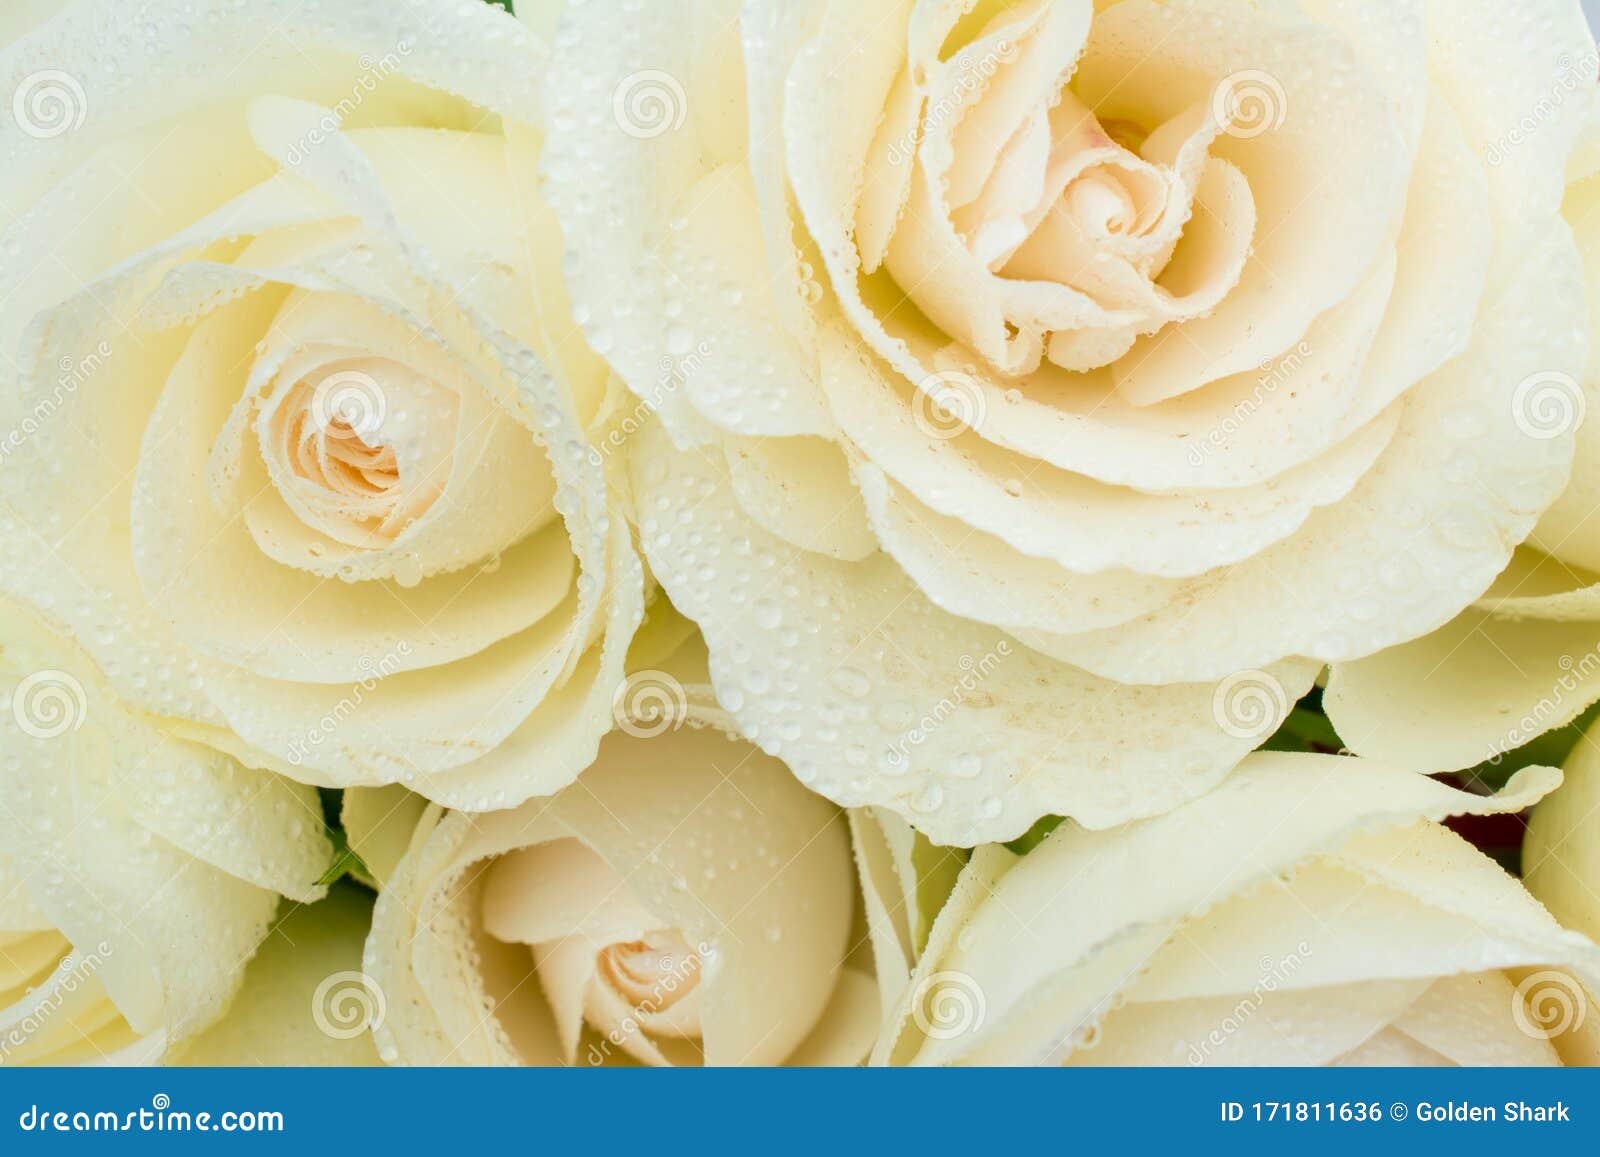 Beautiful Flowers Background with Cream Roses Bouquet Stock Photo ...